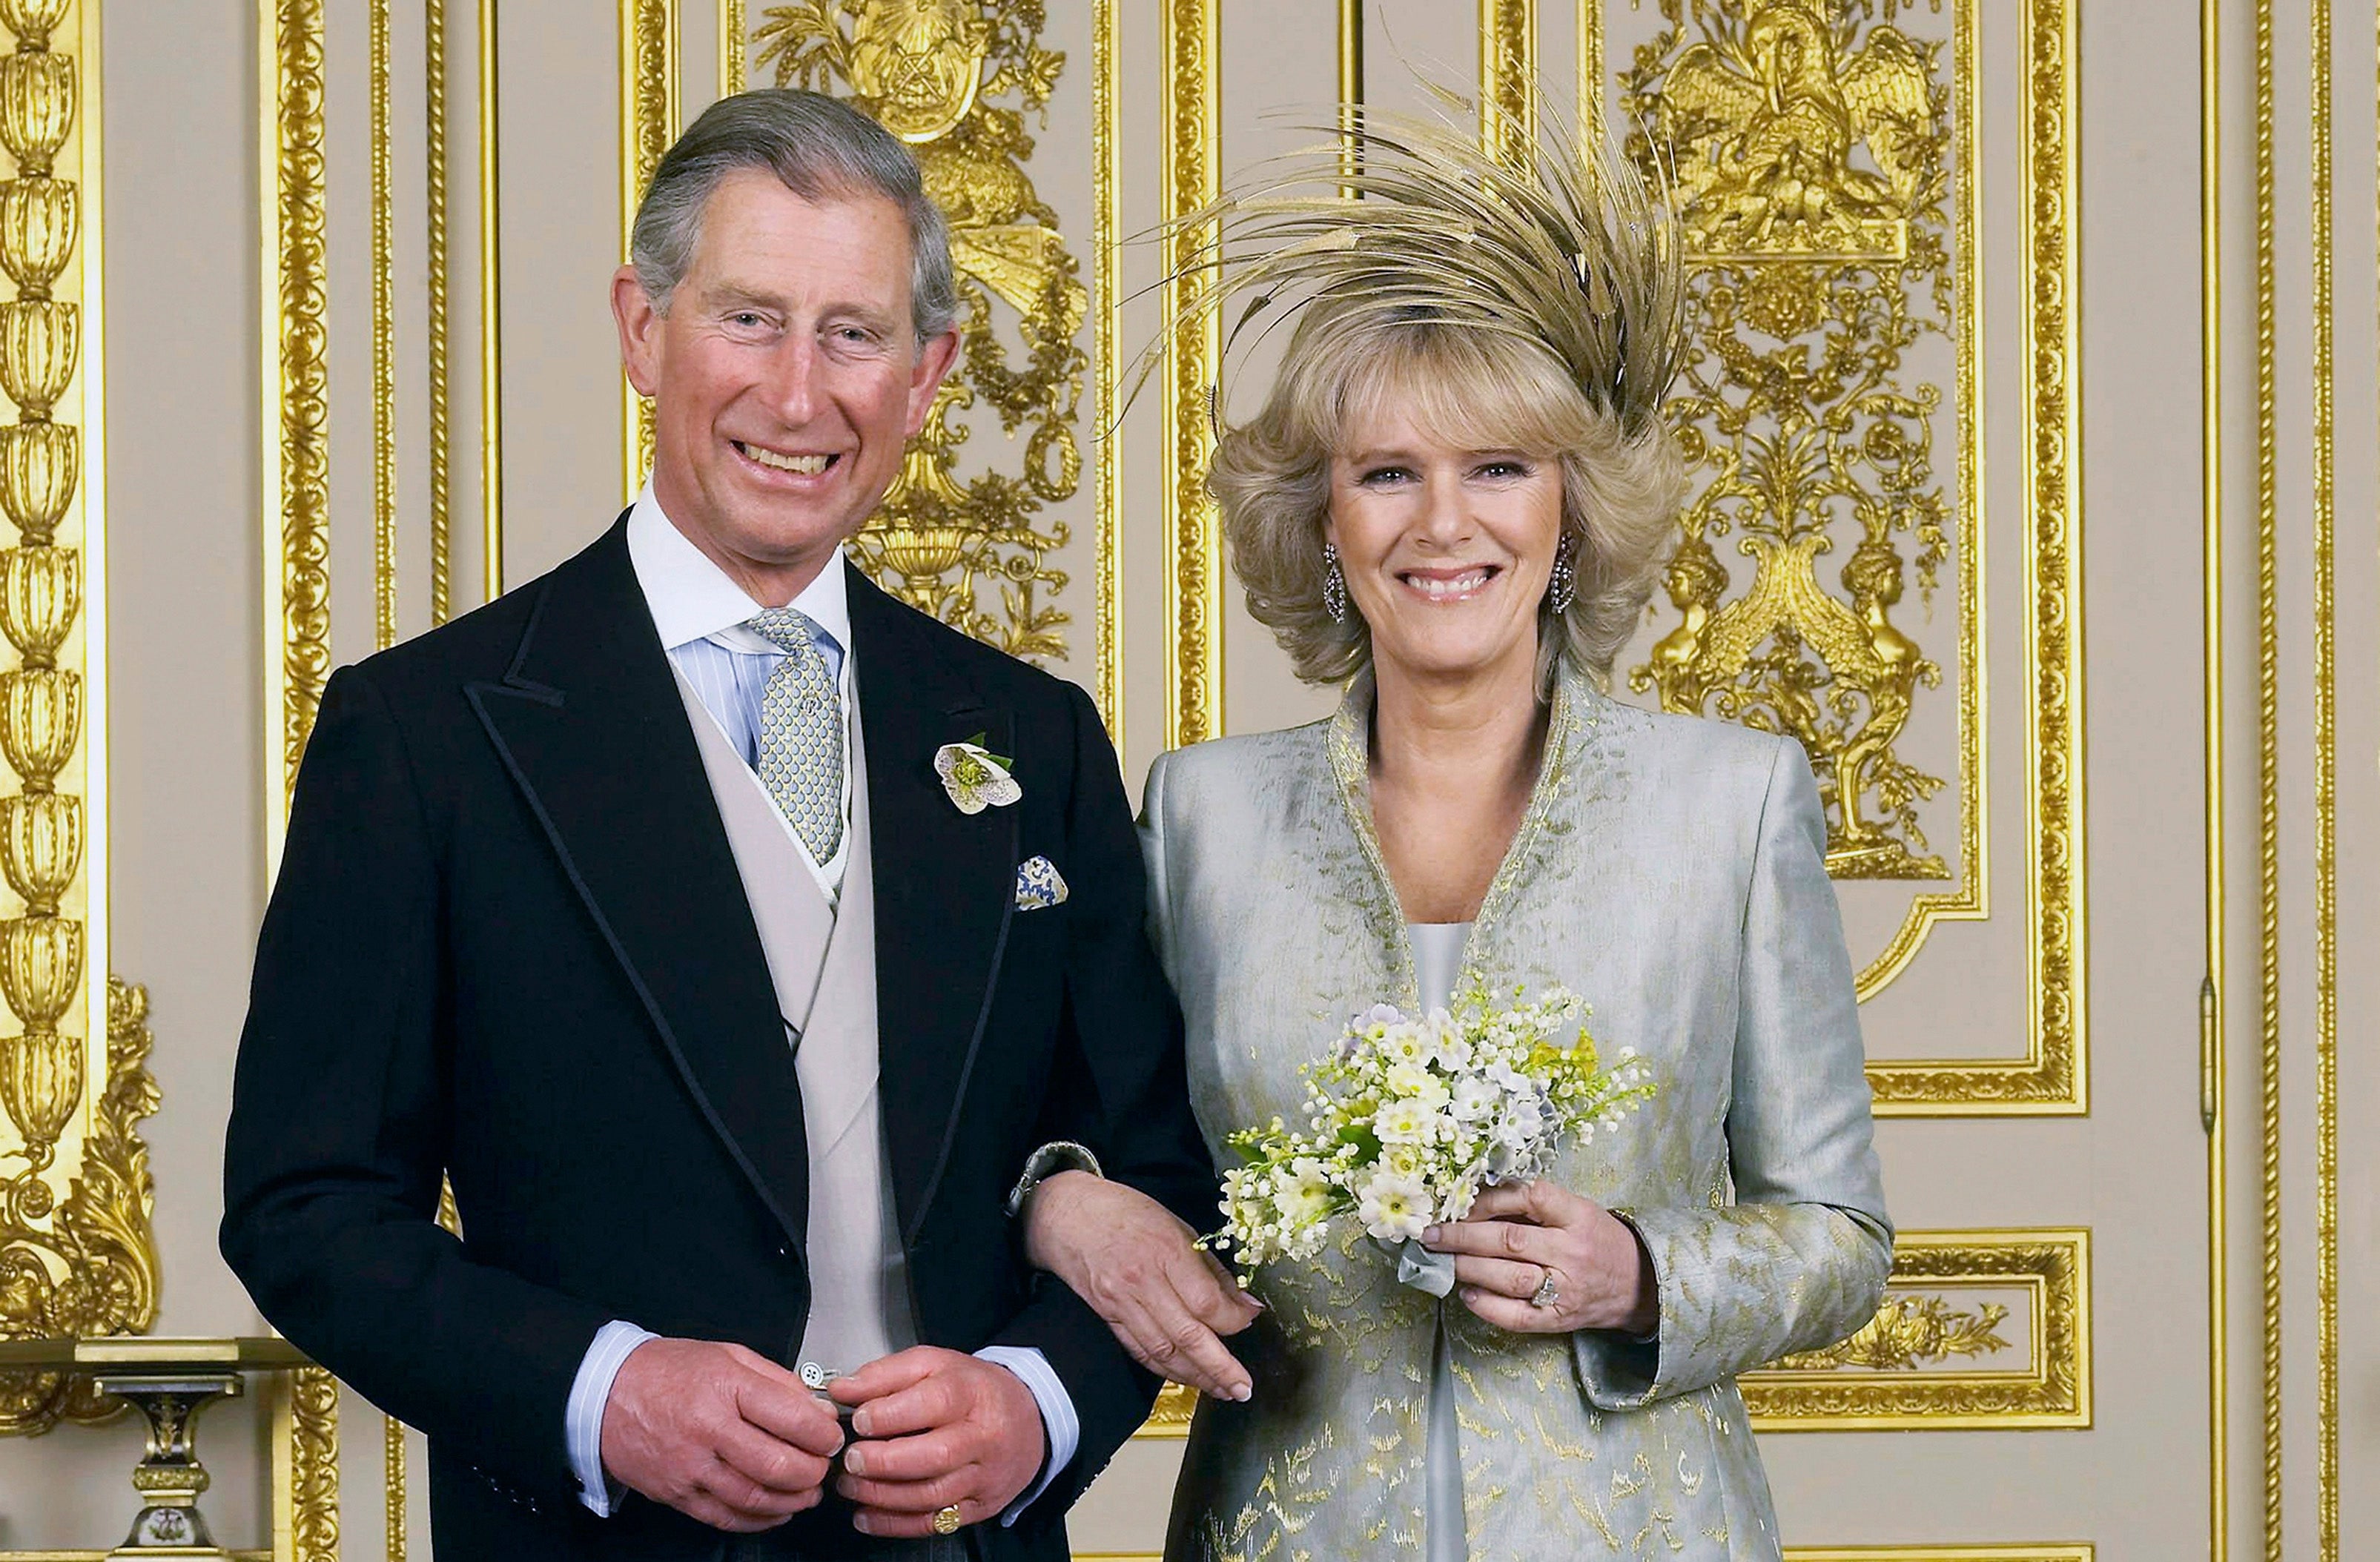 the crown, elizabeth ii, netflix, king charles iii, prince charles, camilla parker bowles, princess diana, the crown season 5: what was the ‘tampongate’ scandal between charles and camilla?